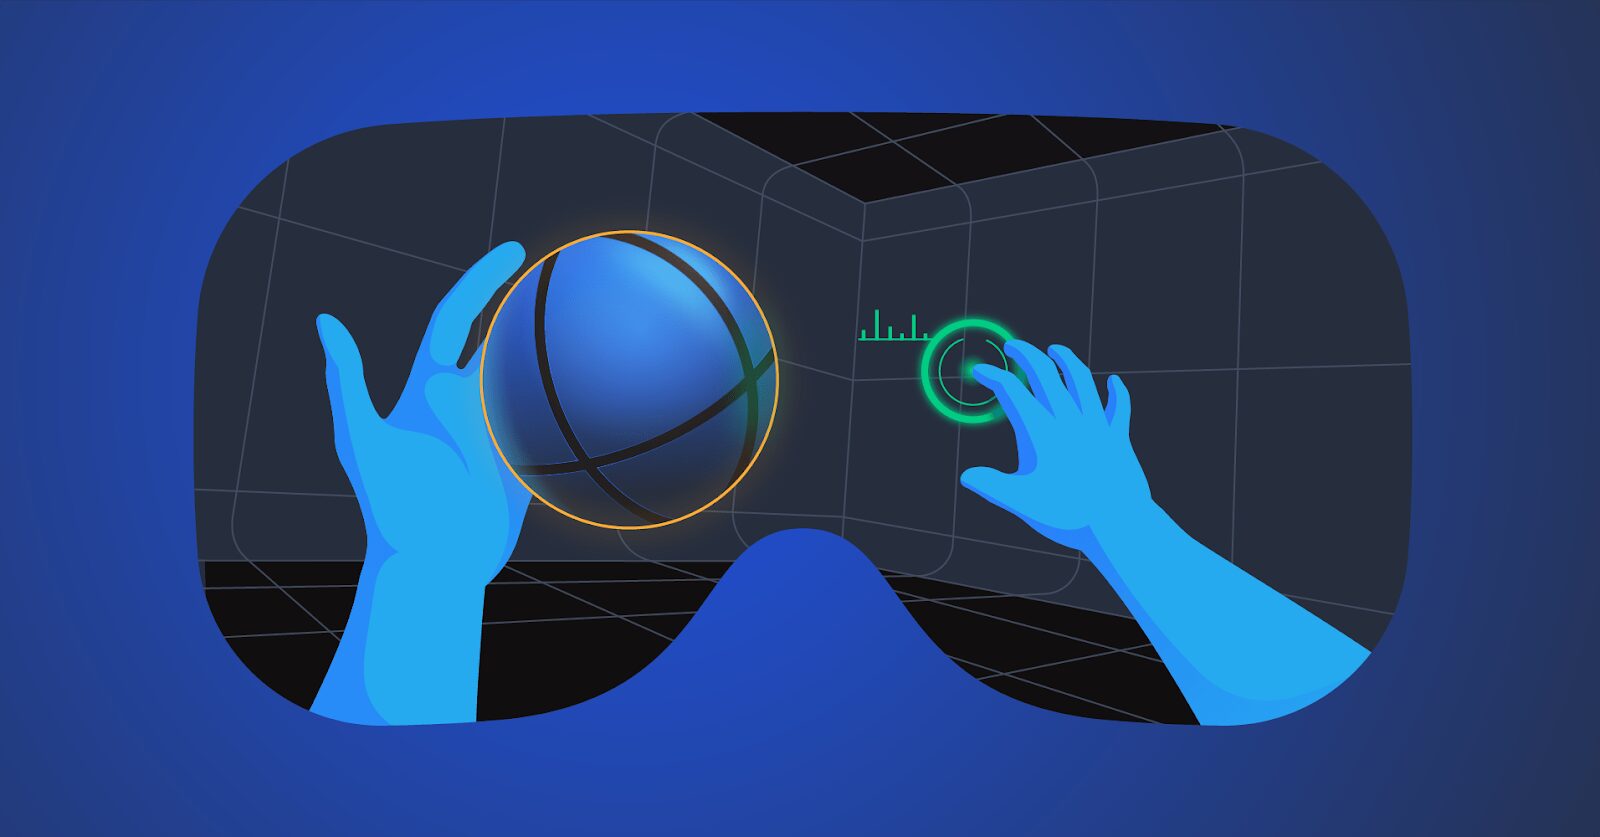 Key Features of Augmented Reality Games